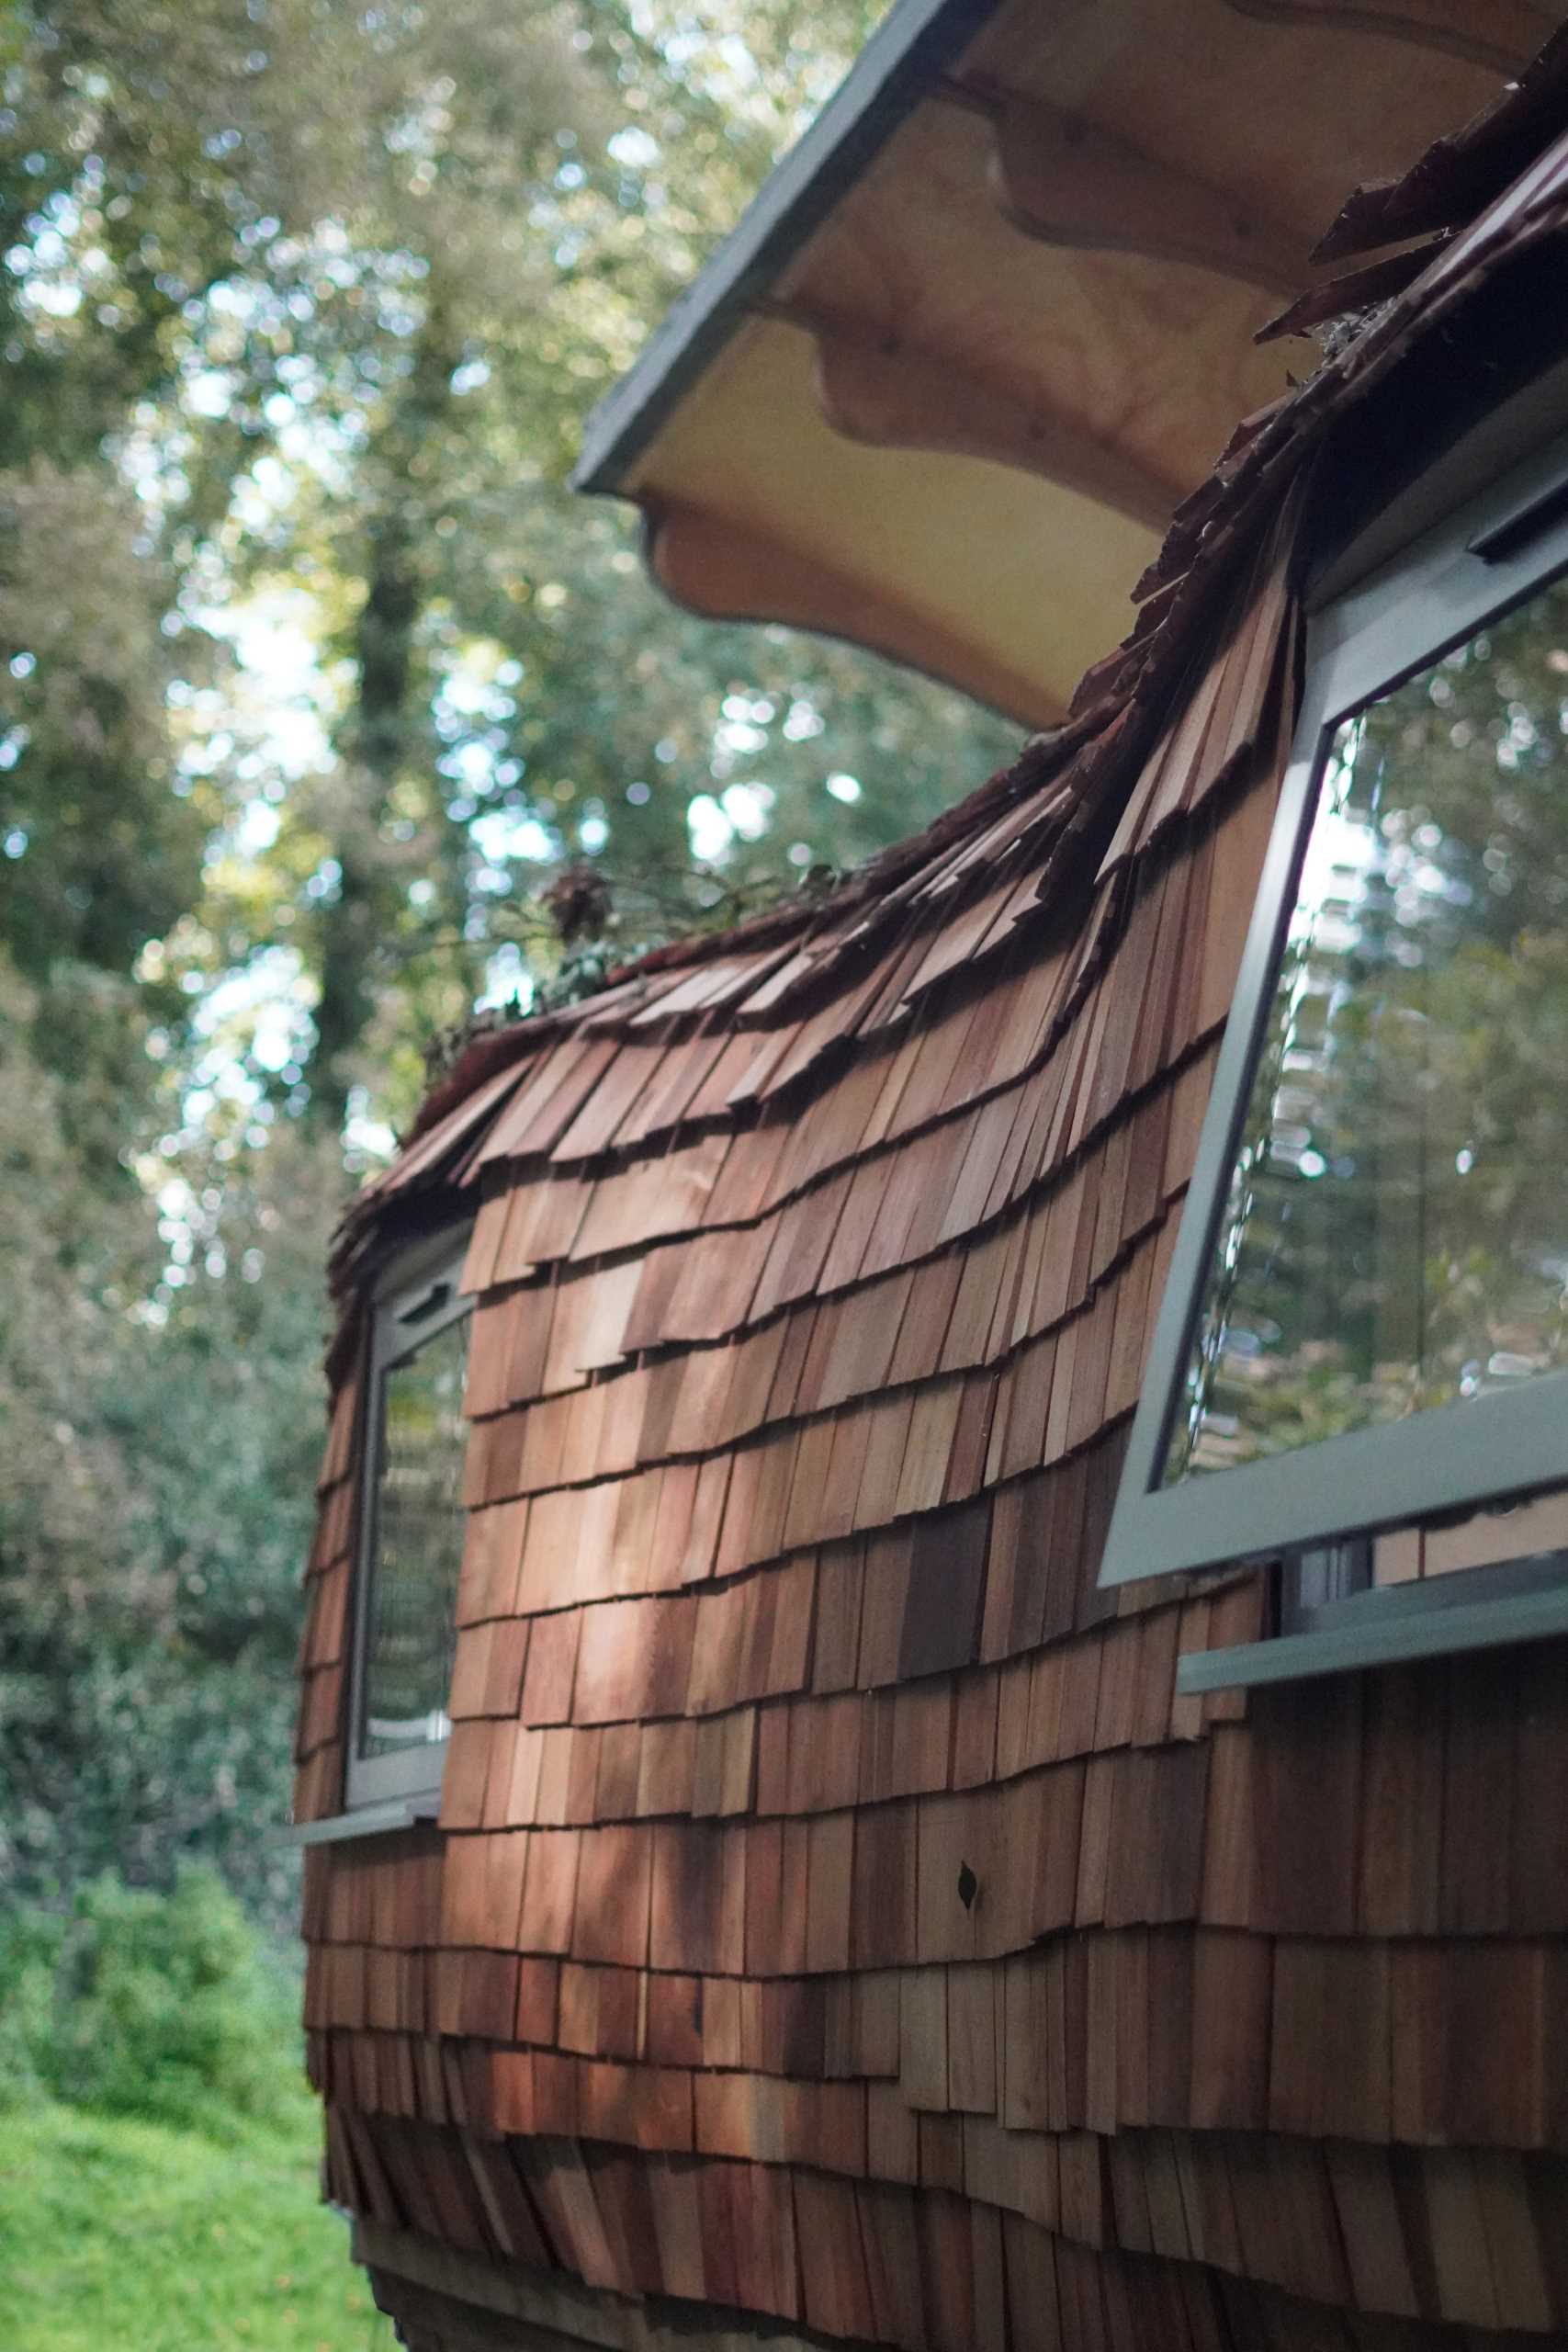 A small organically shaped cabin clad in wood shingles.